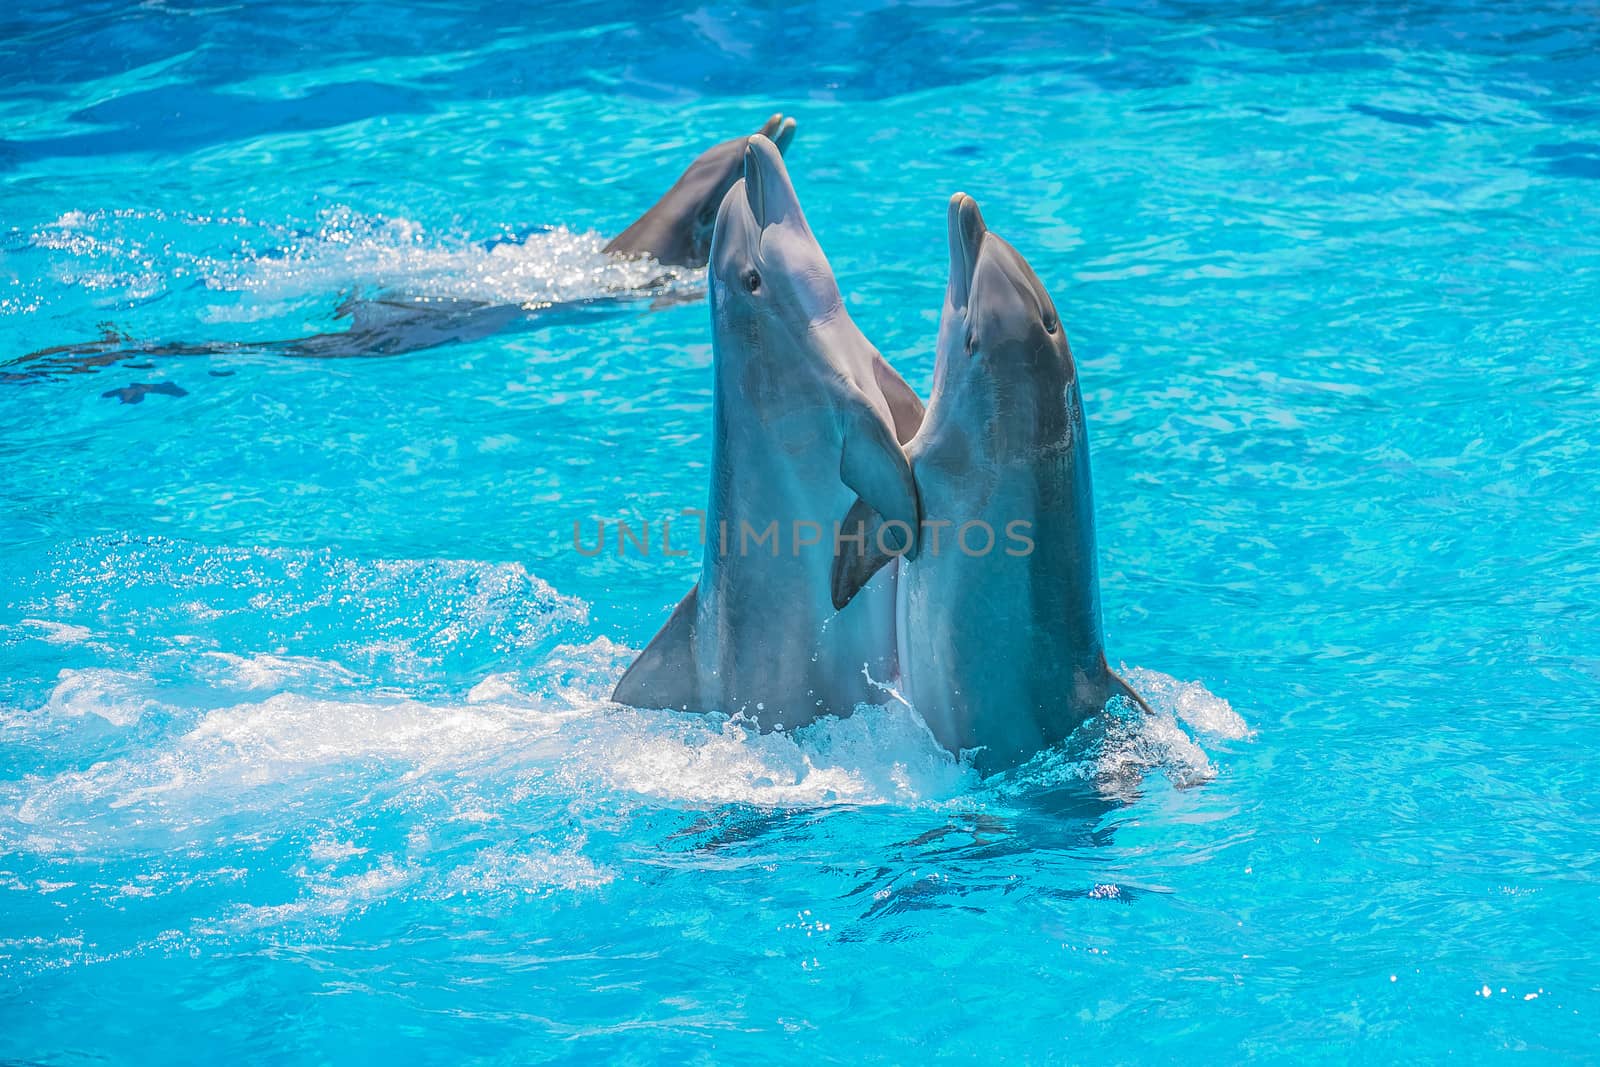 Dolphin pairs has demonstration of tango dancing. All the photos are shot July 25, 2013